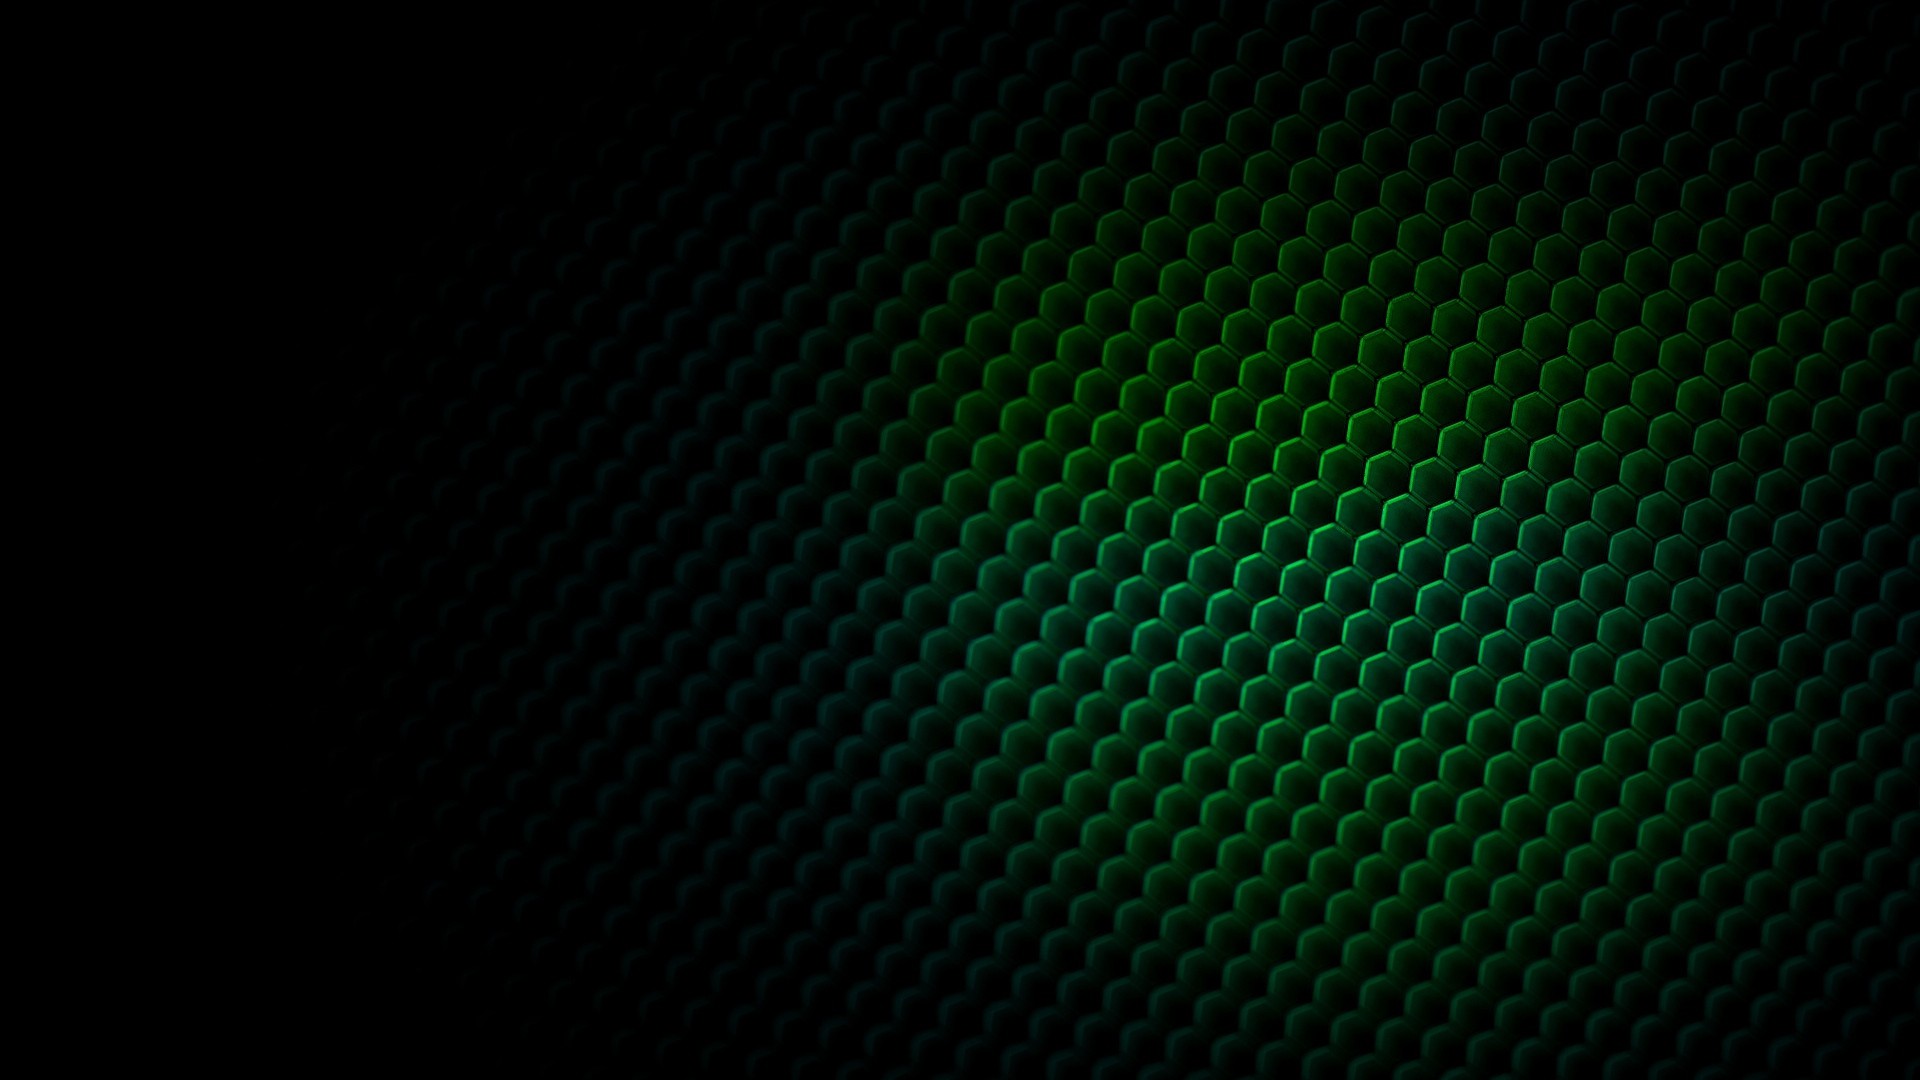 Wallpaper HD Dark Green with image resolution 1920x1080 pixel. You can make this wallpaper for your Desktop Computer Backgrounds, Mac Wallpapers, Android Lock screen or iPhone Screensavers